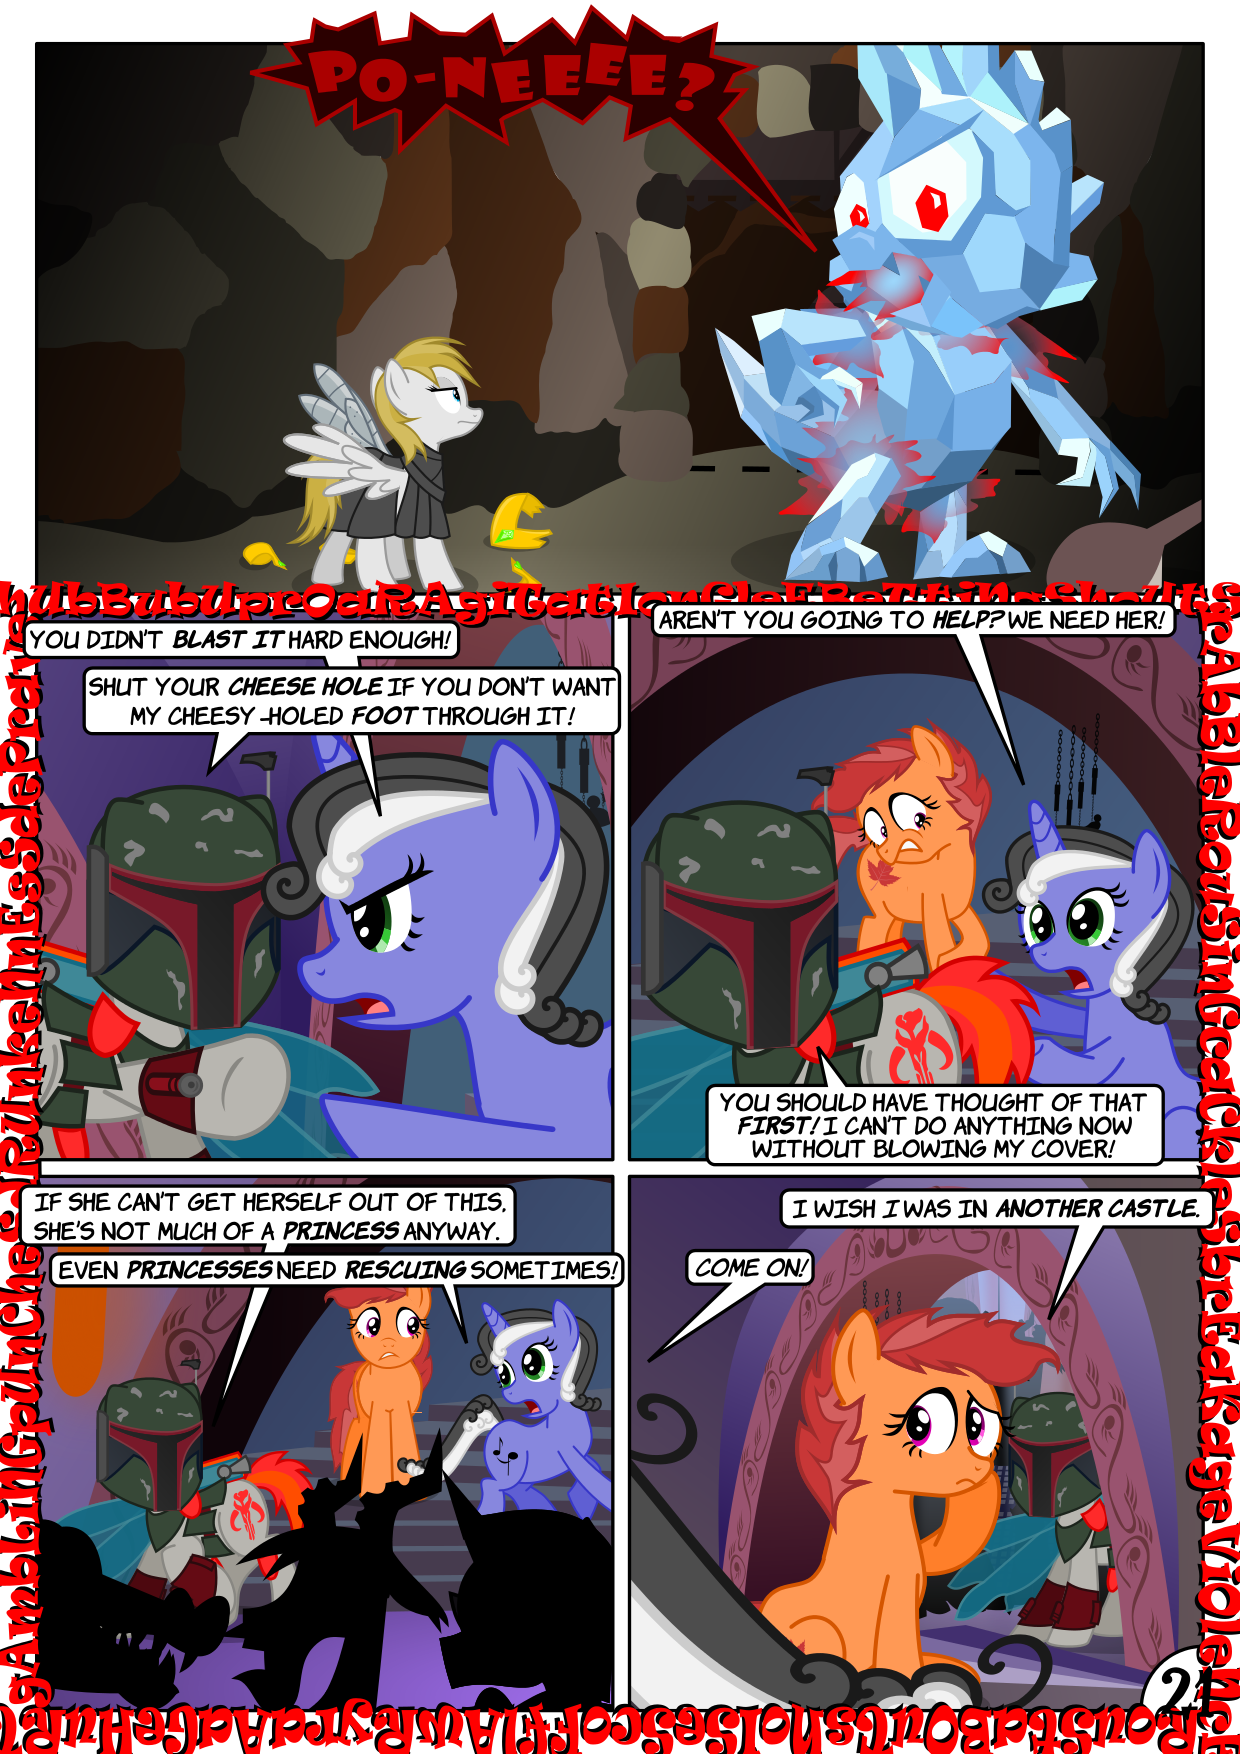 Star Mares 3.1.21: To The Rescue